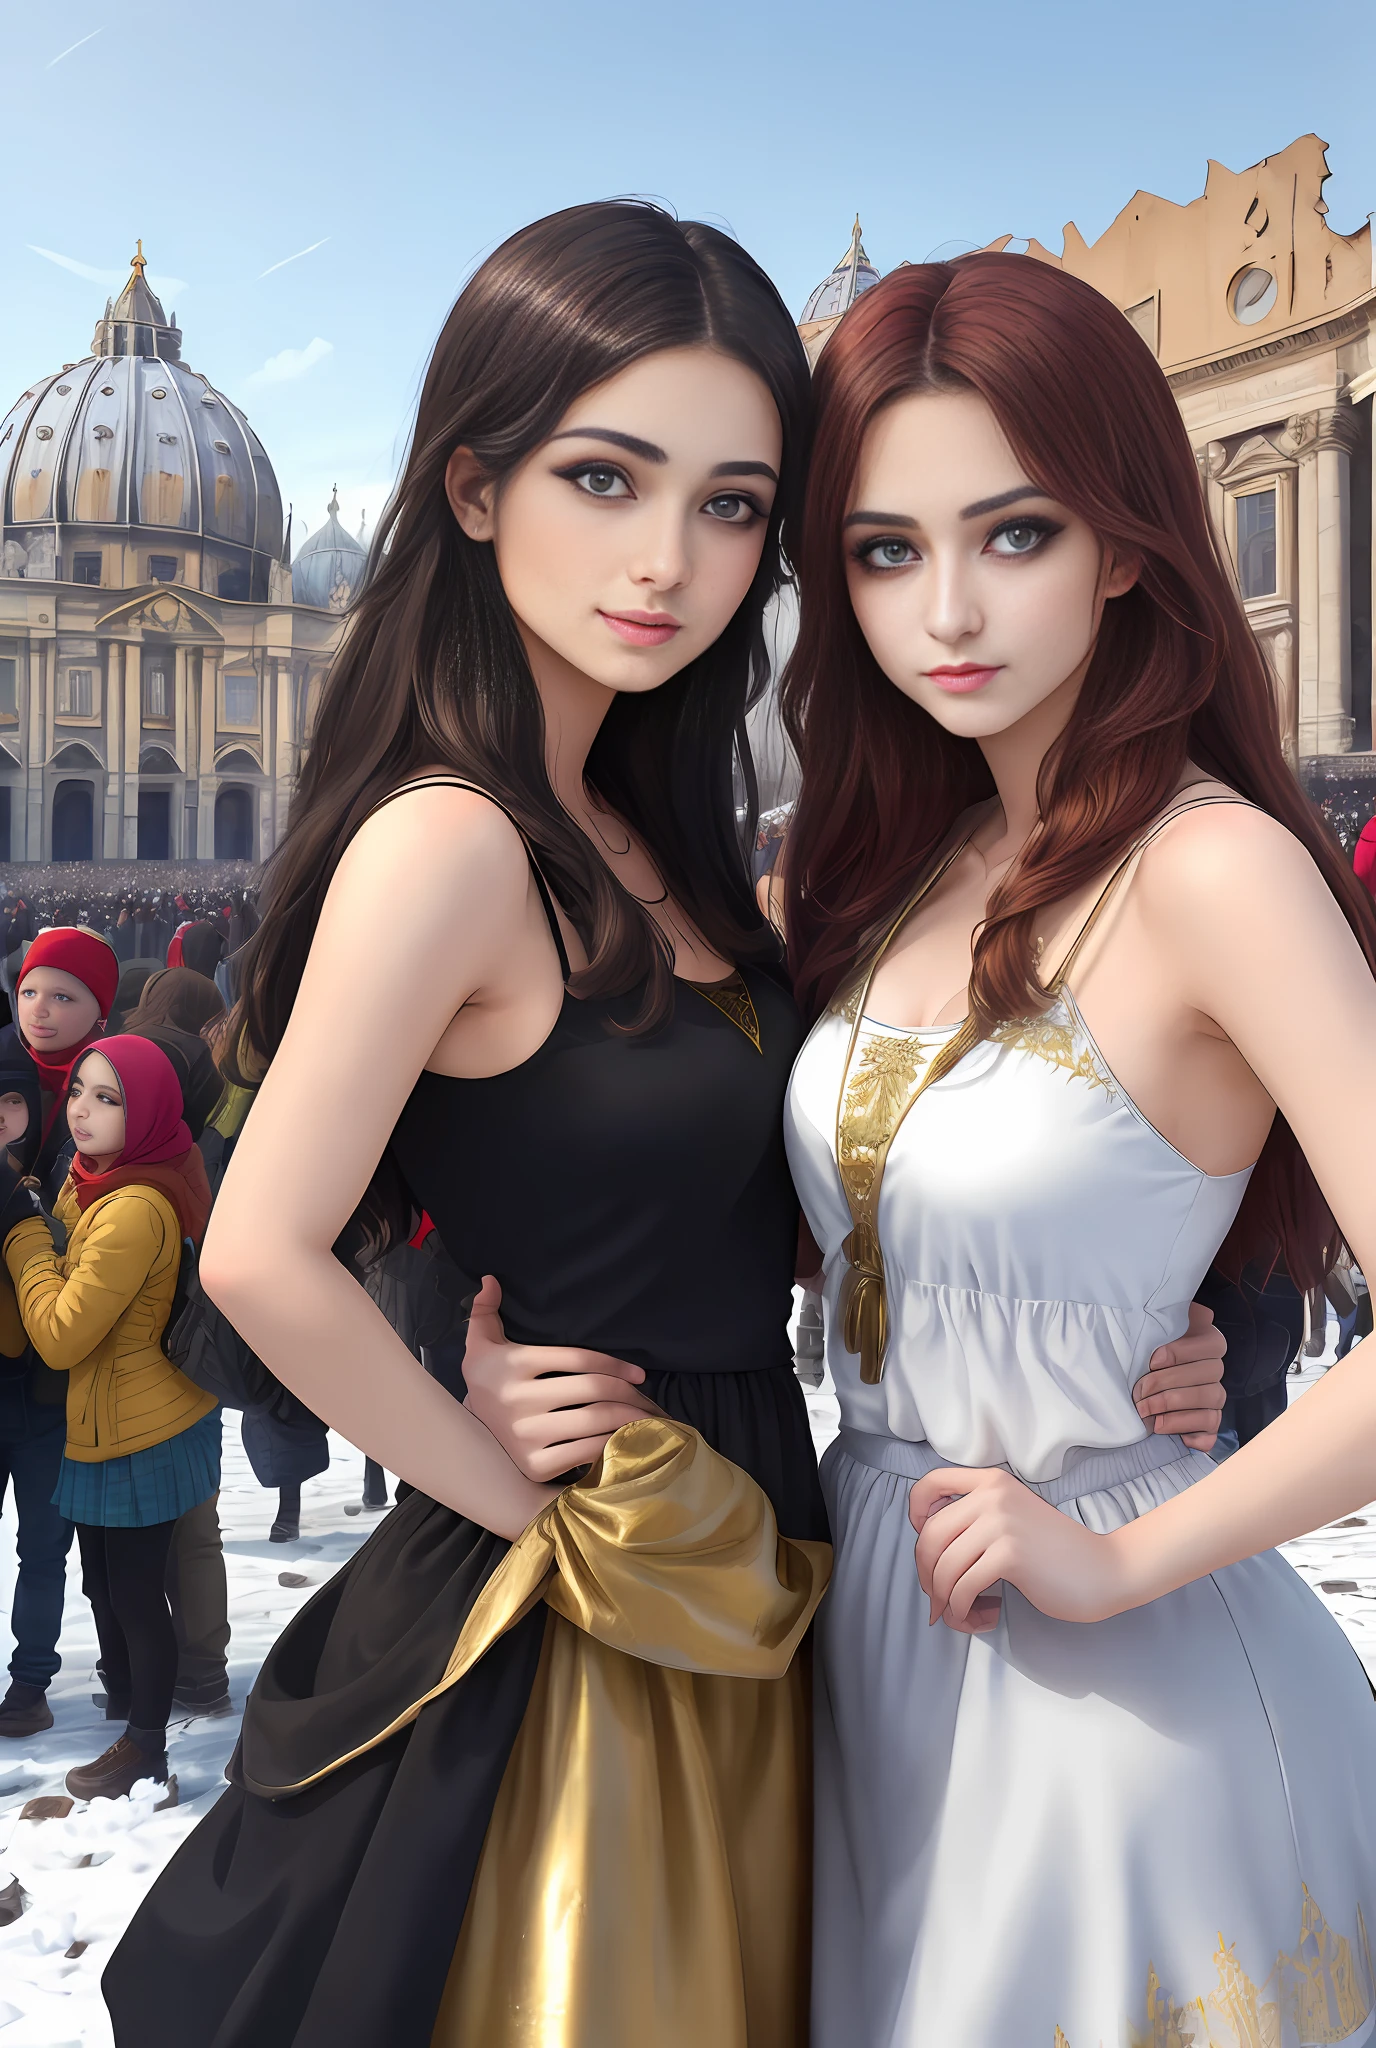 (Masterpiece, Best quality, Realistic),
2girls,duo,winter,Snowy,(on the St. Peter's Square of Vatican,crowd of), Saint. Peter's Square of Vatican background,gypsy dress,(Princess Eyes,shiny pupils),Dancing,  gold, banquet, crowd of, picking up skirt,
[Slight smile],